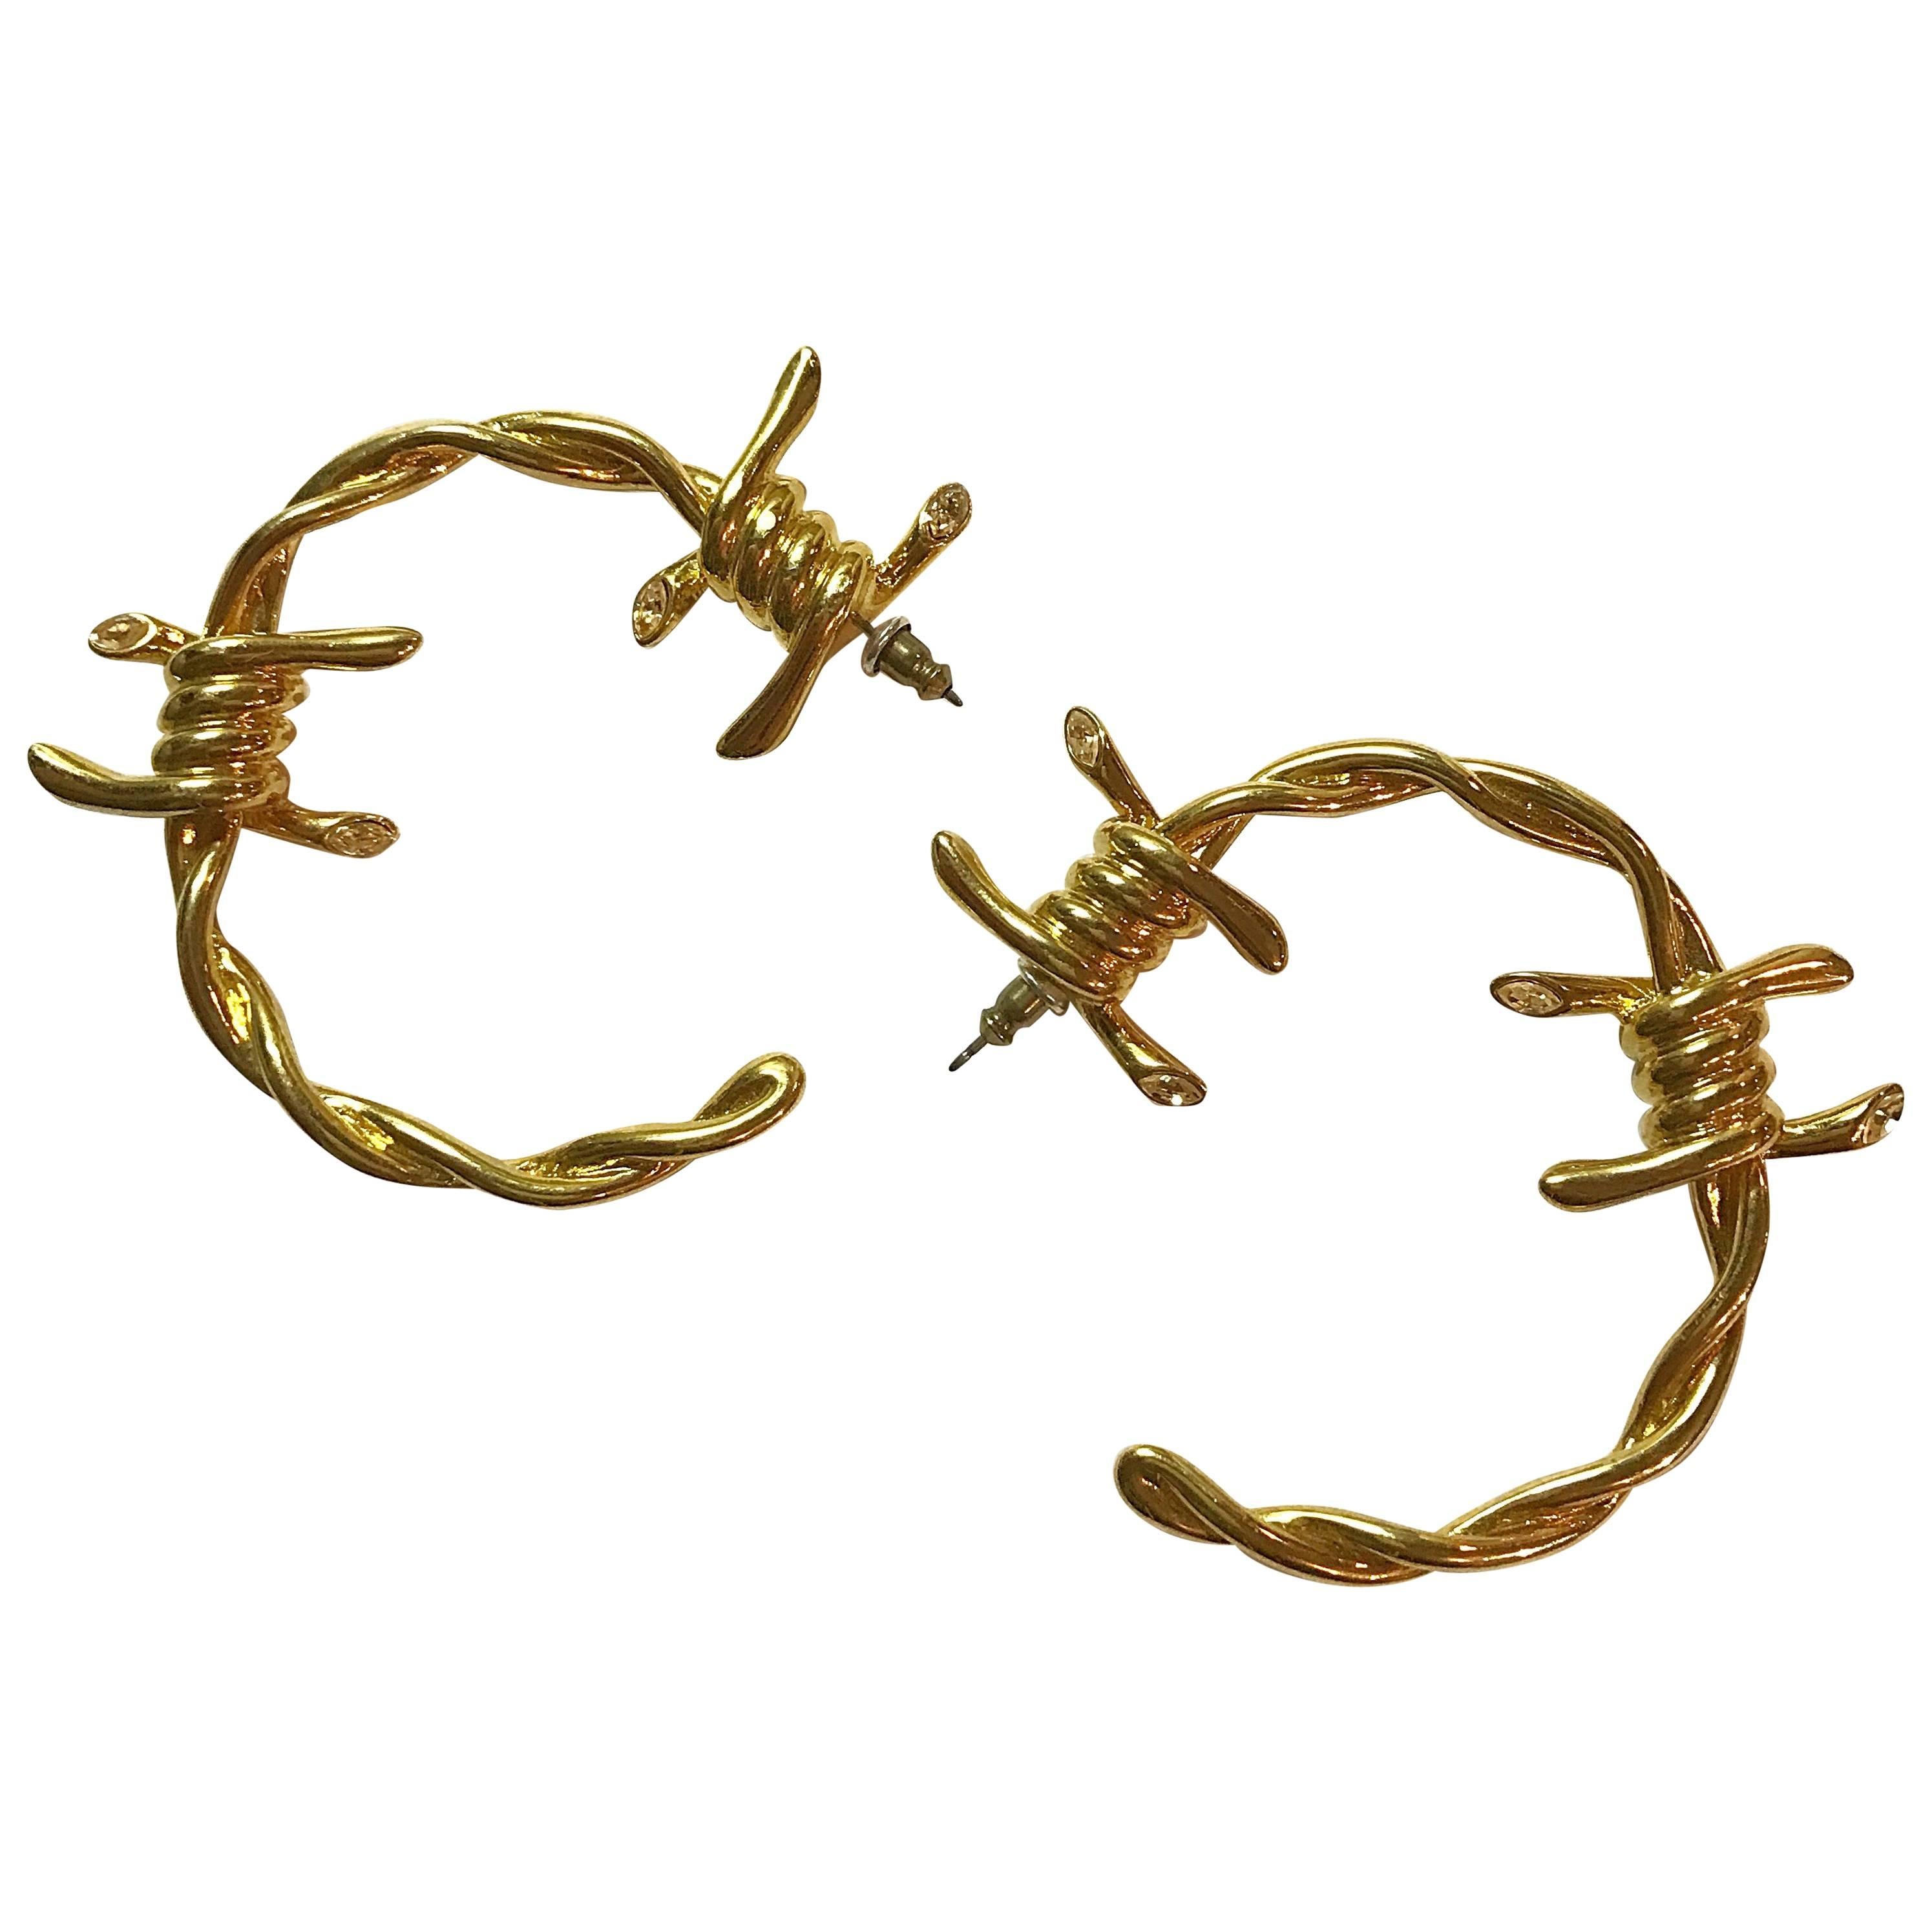 Rare Vivienne Westwood For Agent Provocateur Gold Barbed Wire Big Hoop Earrings